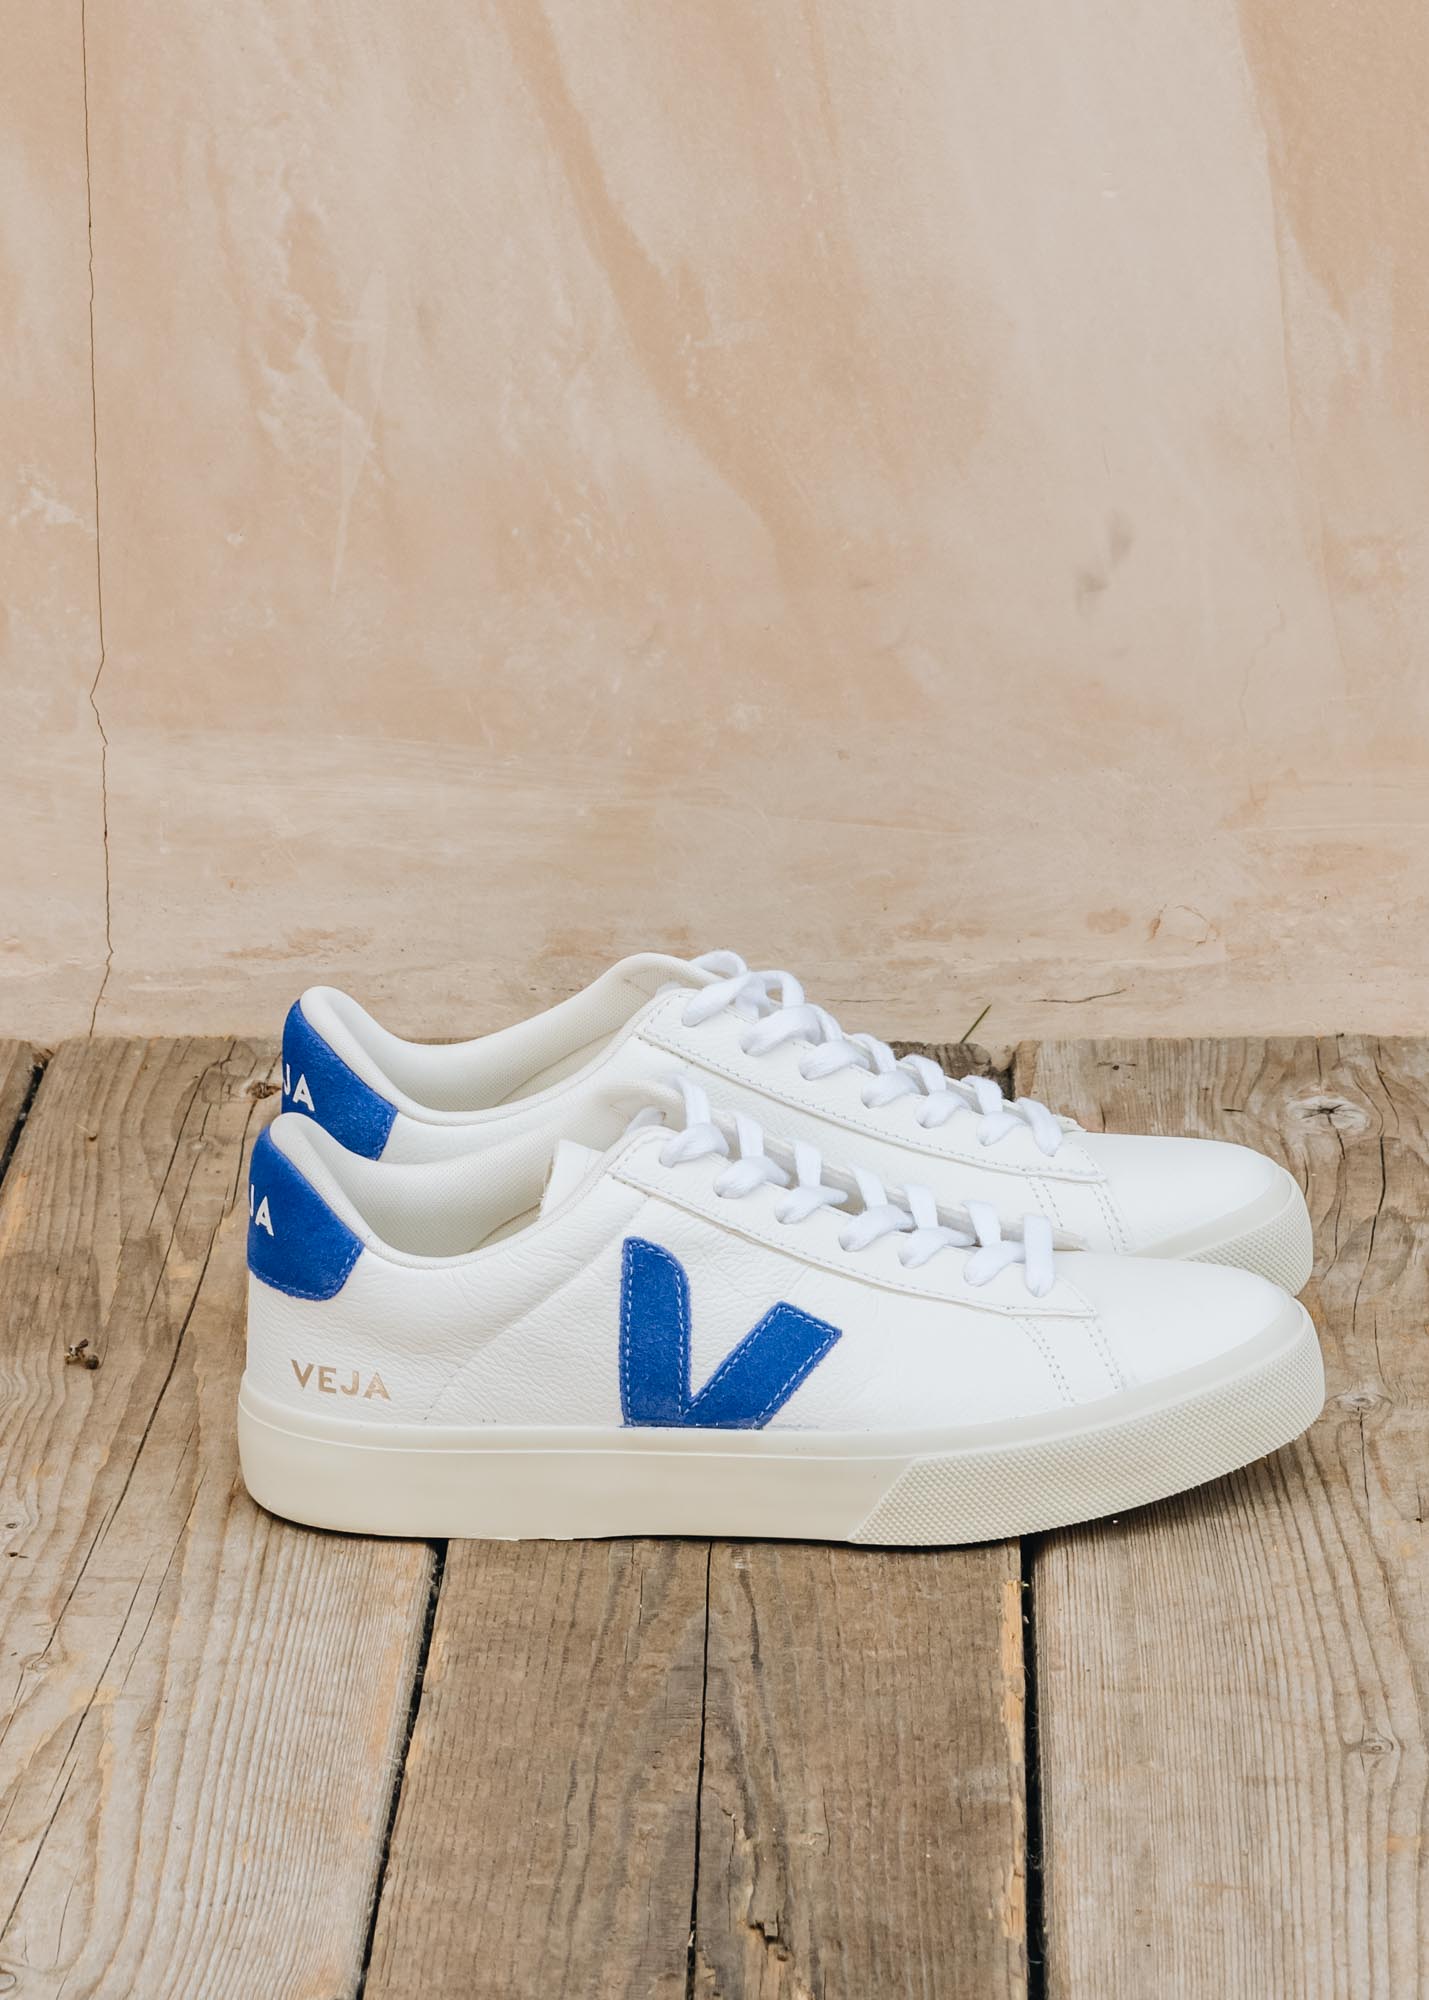 Veja Women's Campo Leather Trainers in Extra White and Paros